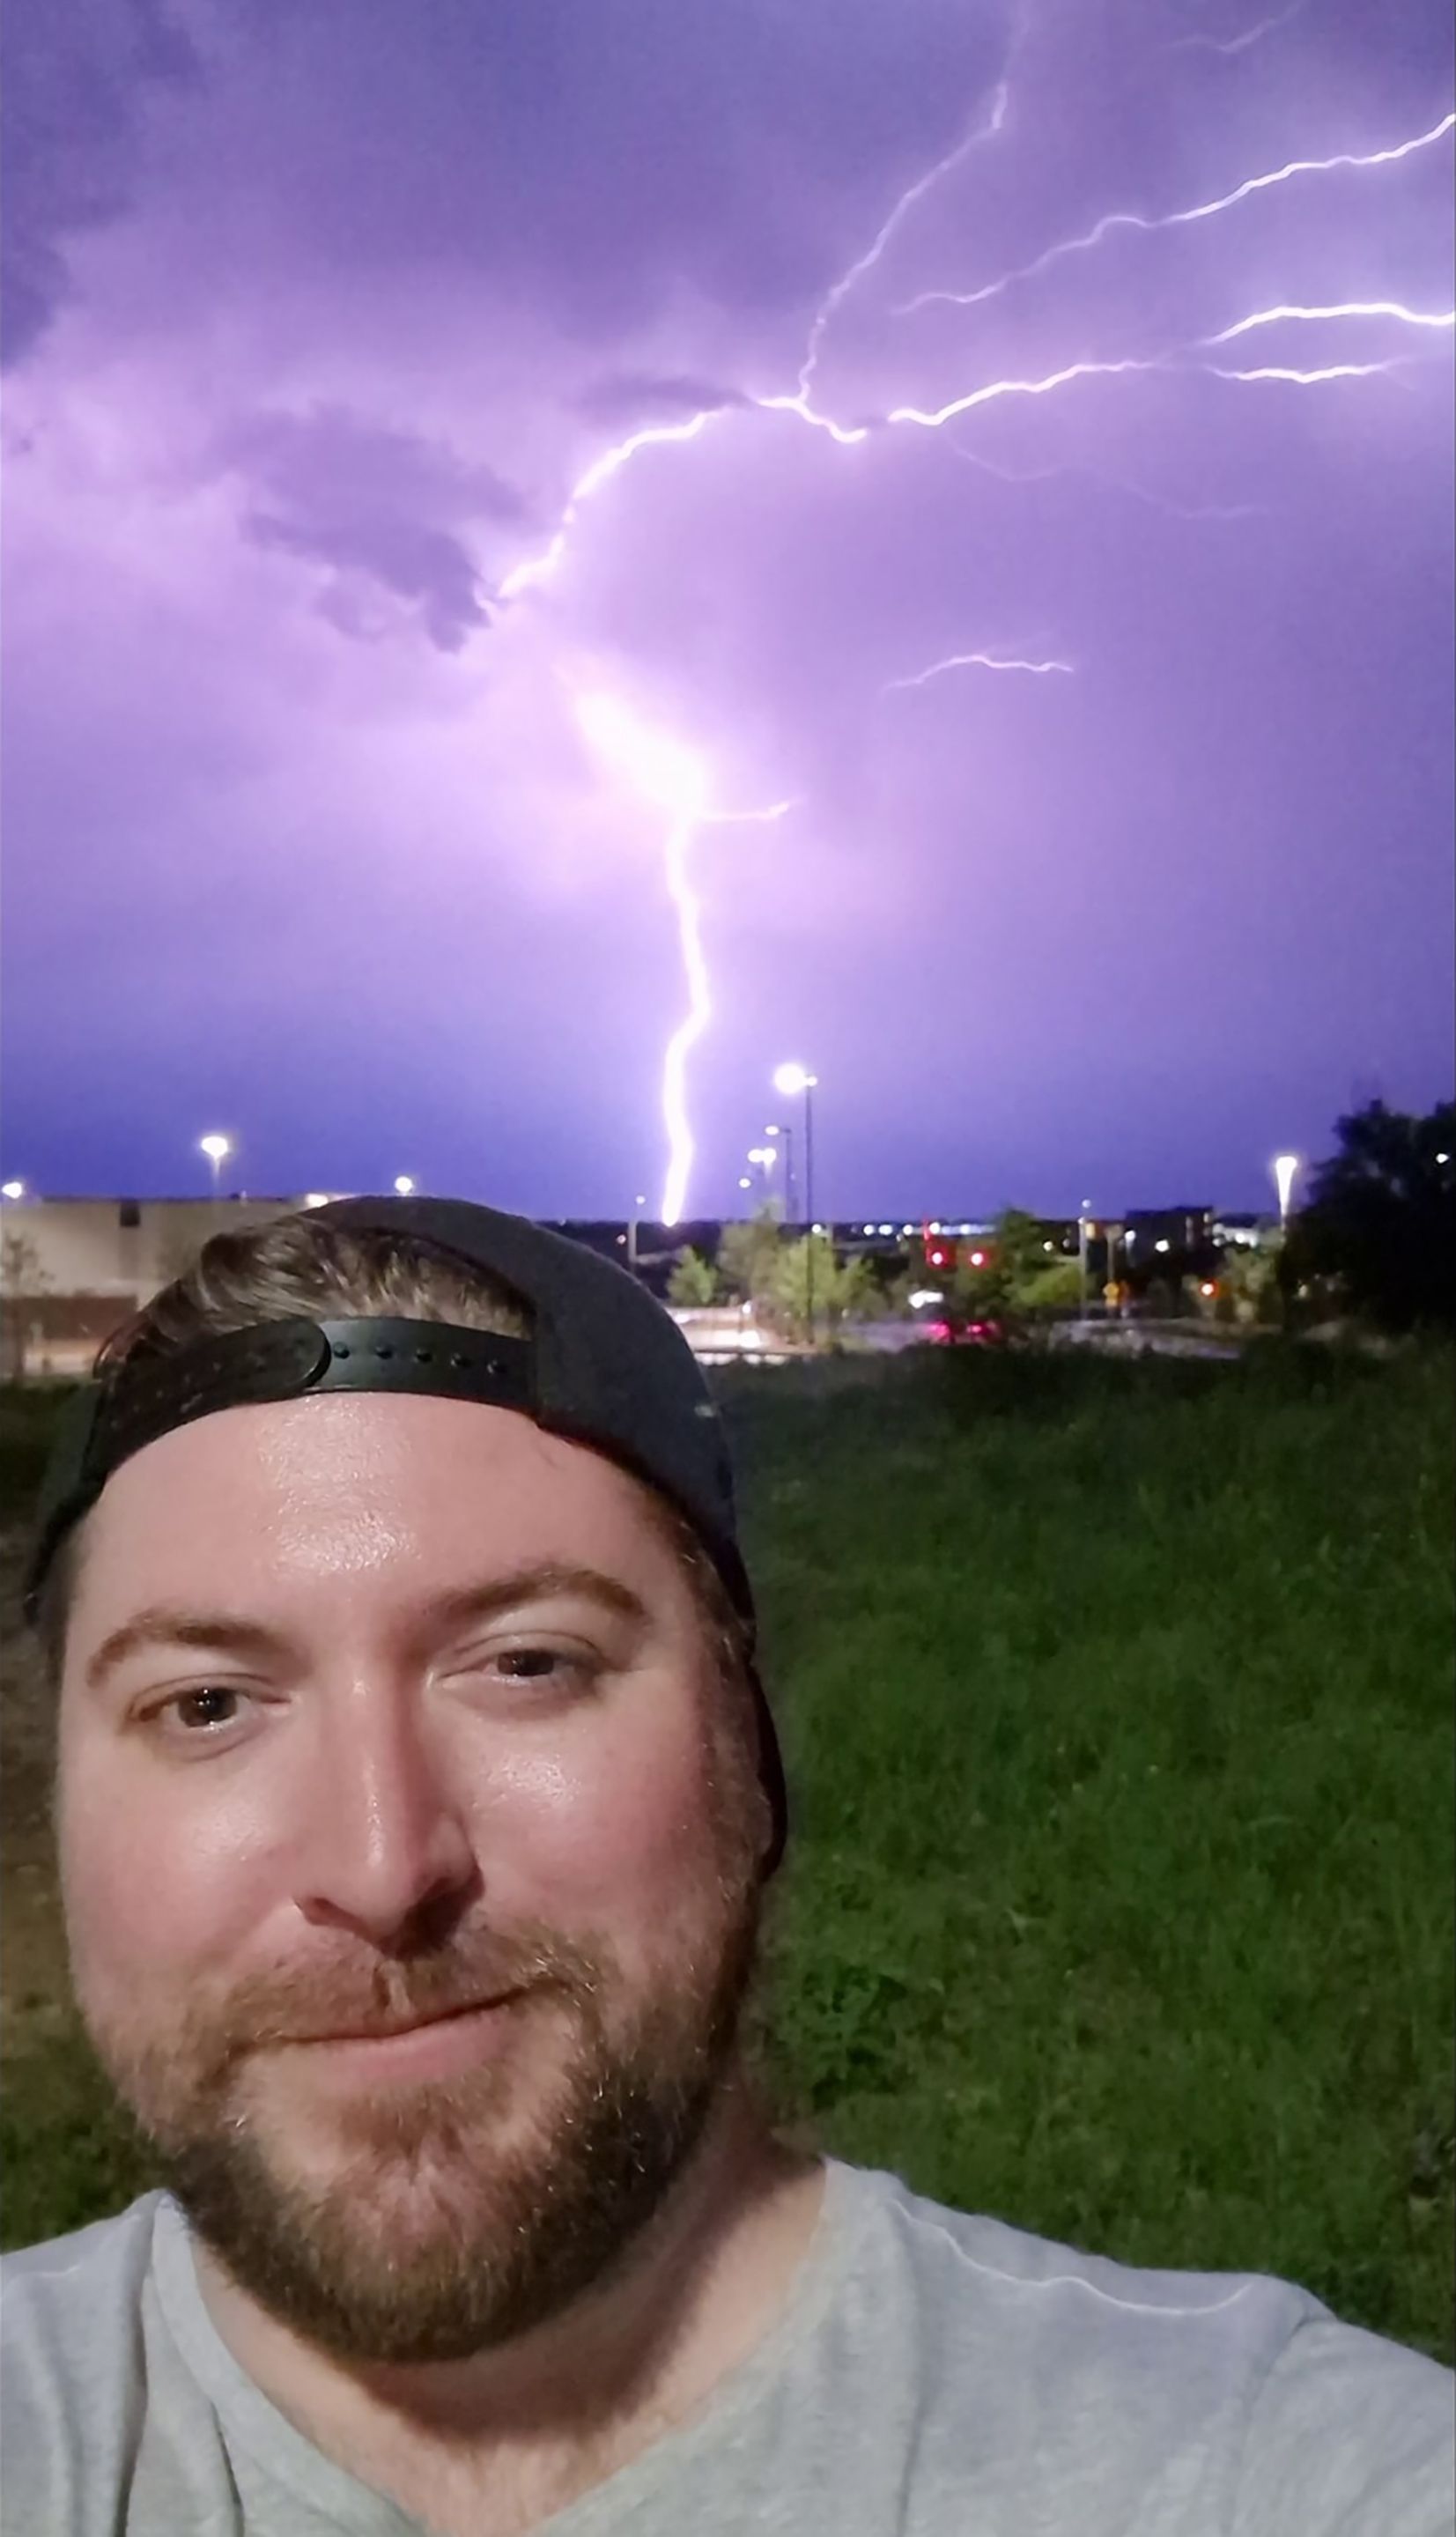 A man is taking a selfie in front of a lightning storm.